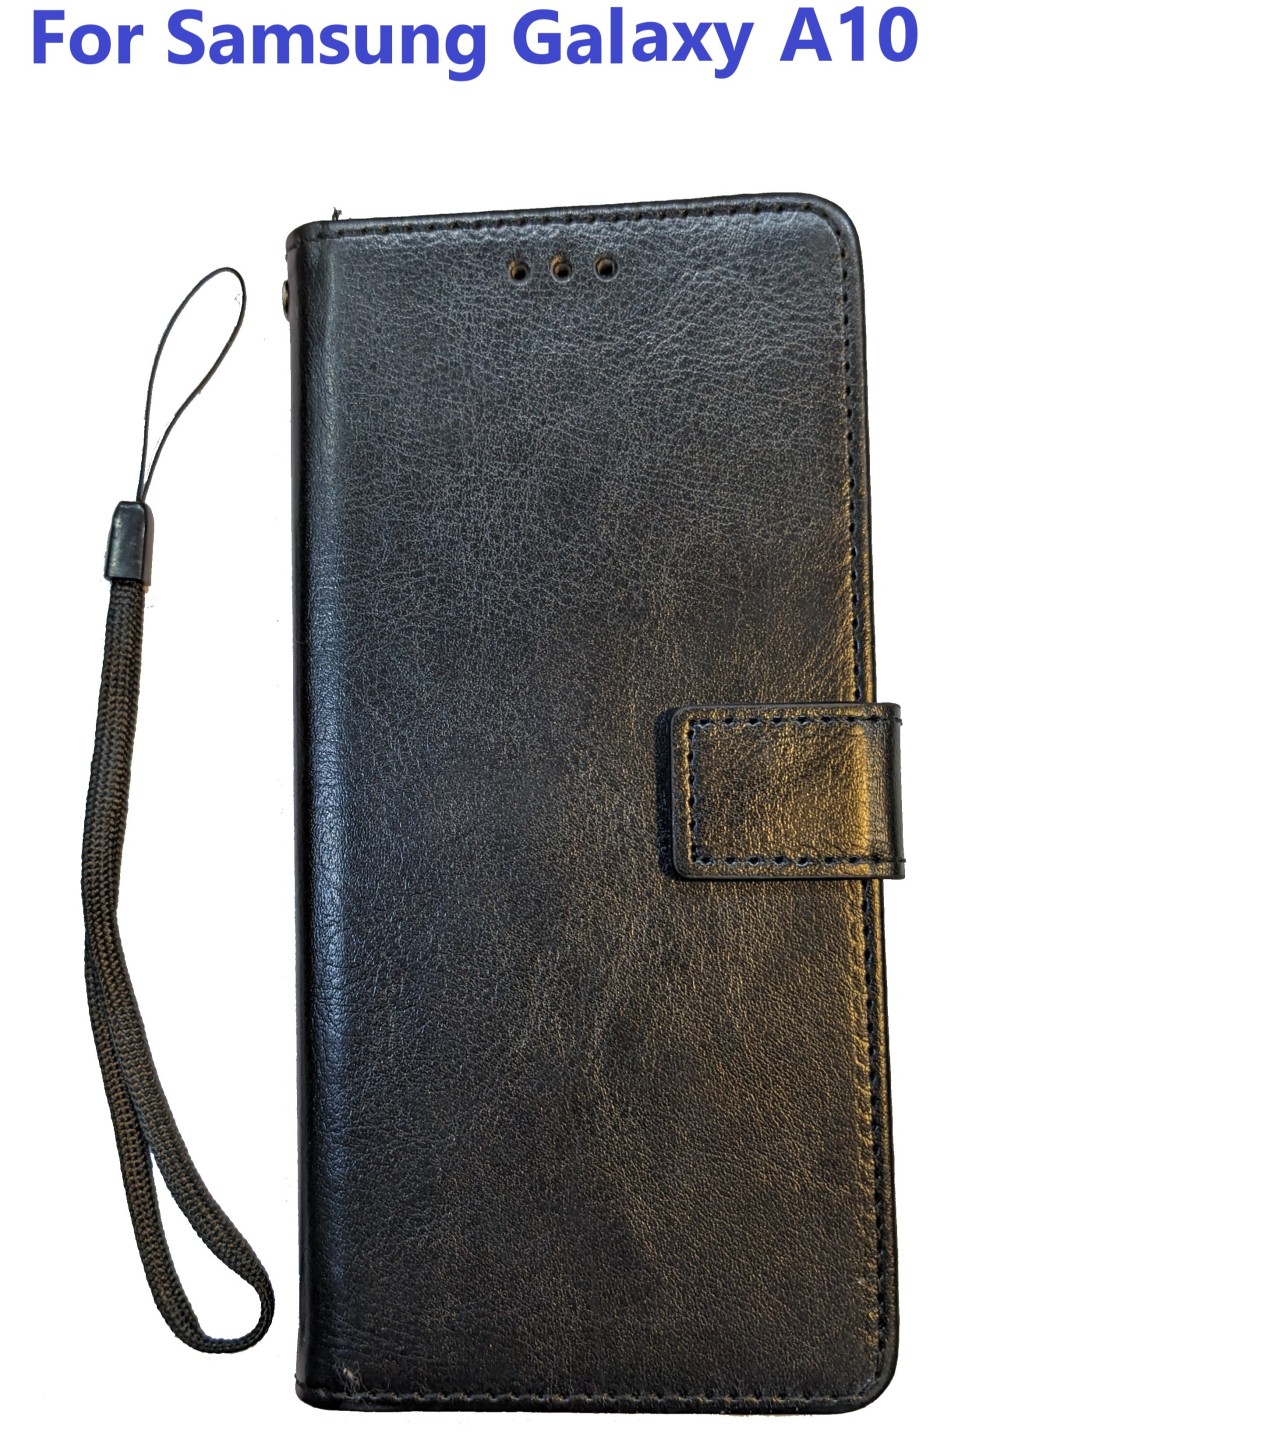 Flip book Wallet Leather Samsung Galaxy A10 Case with magnetic layer